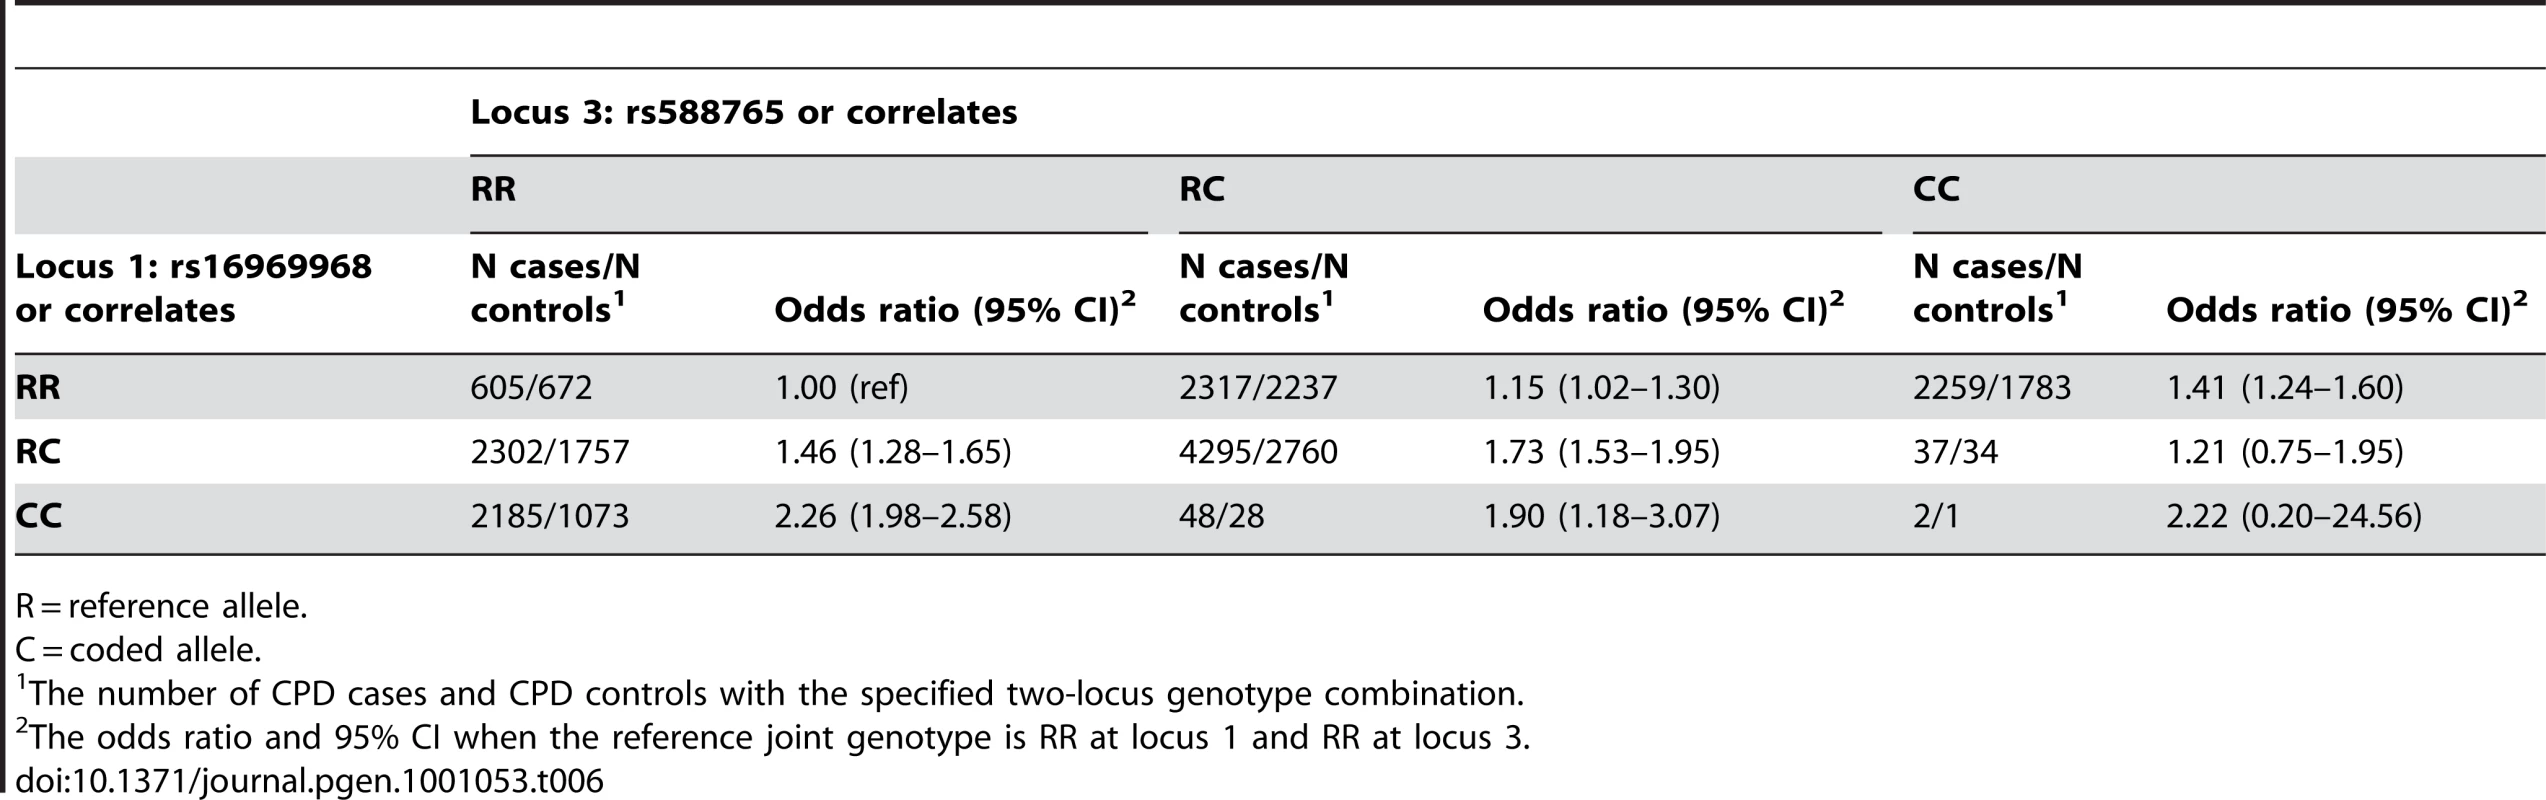 Joint genotype table for locus 1 versus locus 3 in CPD cases (heavy smokers) and controls (light smokers).